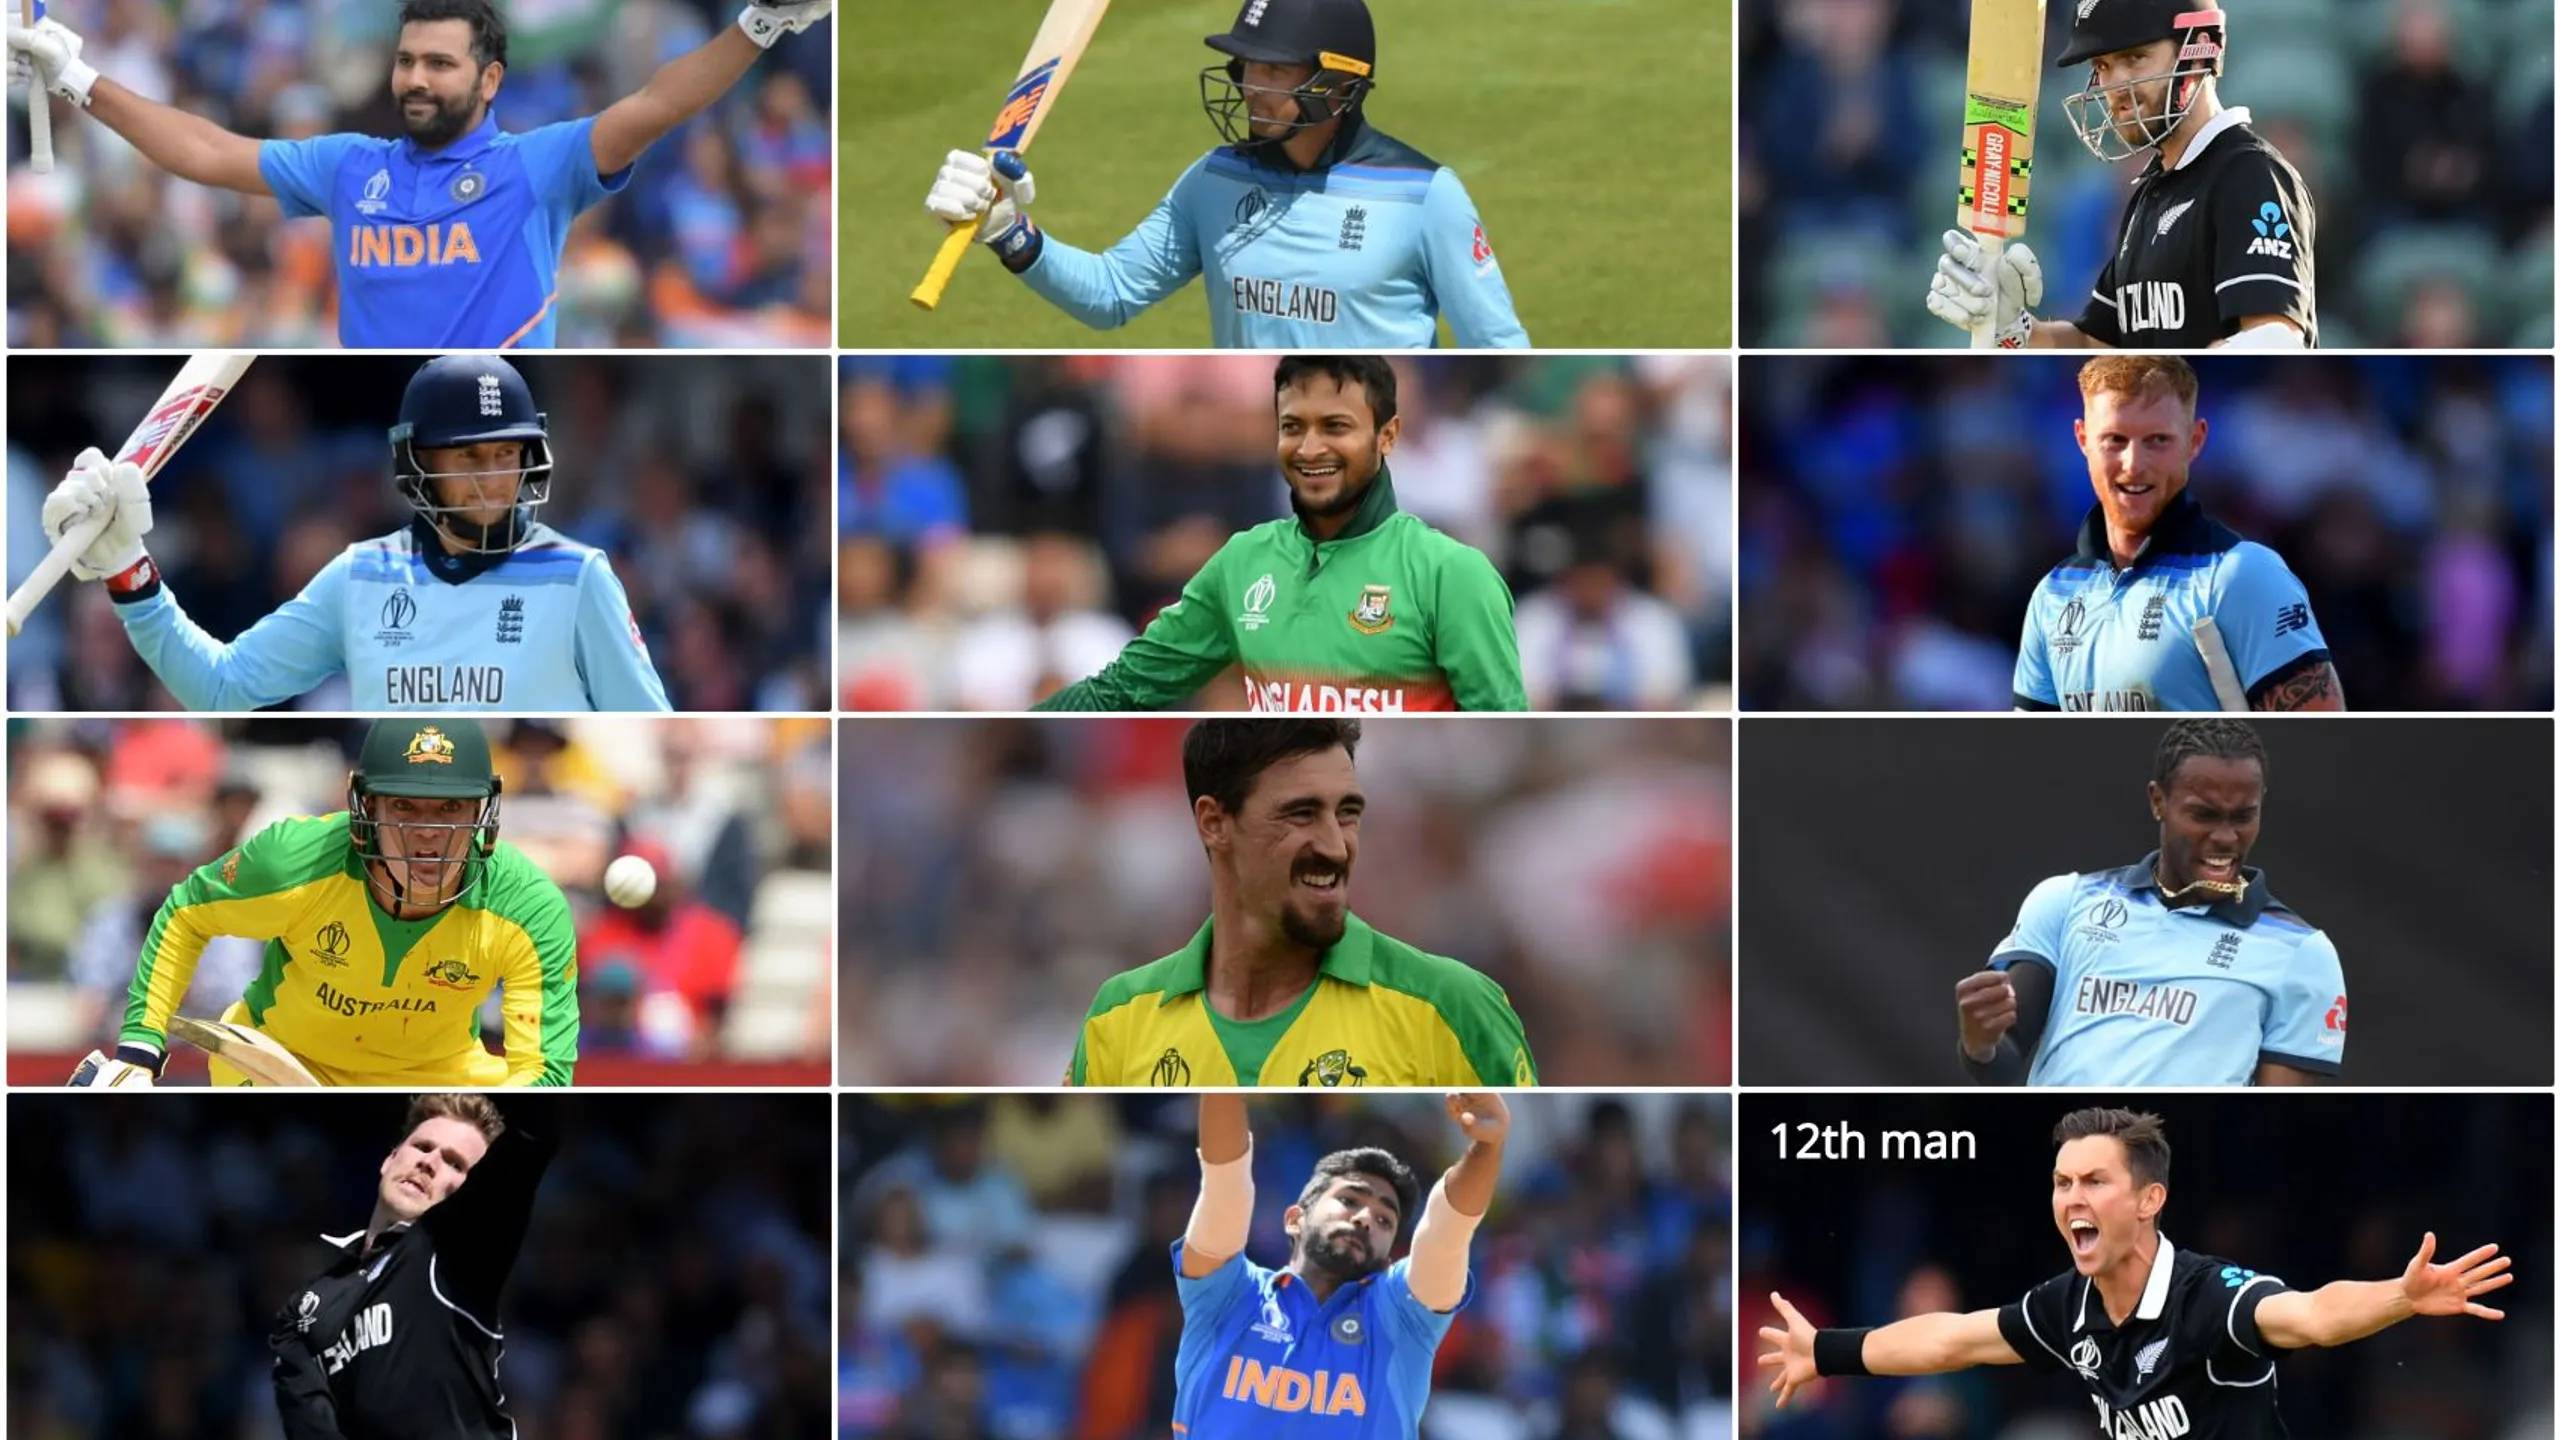 8 cricket stars who could play the last ICC Cricket World Cup